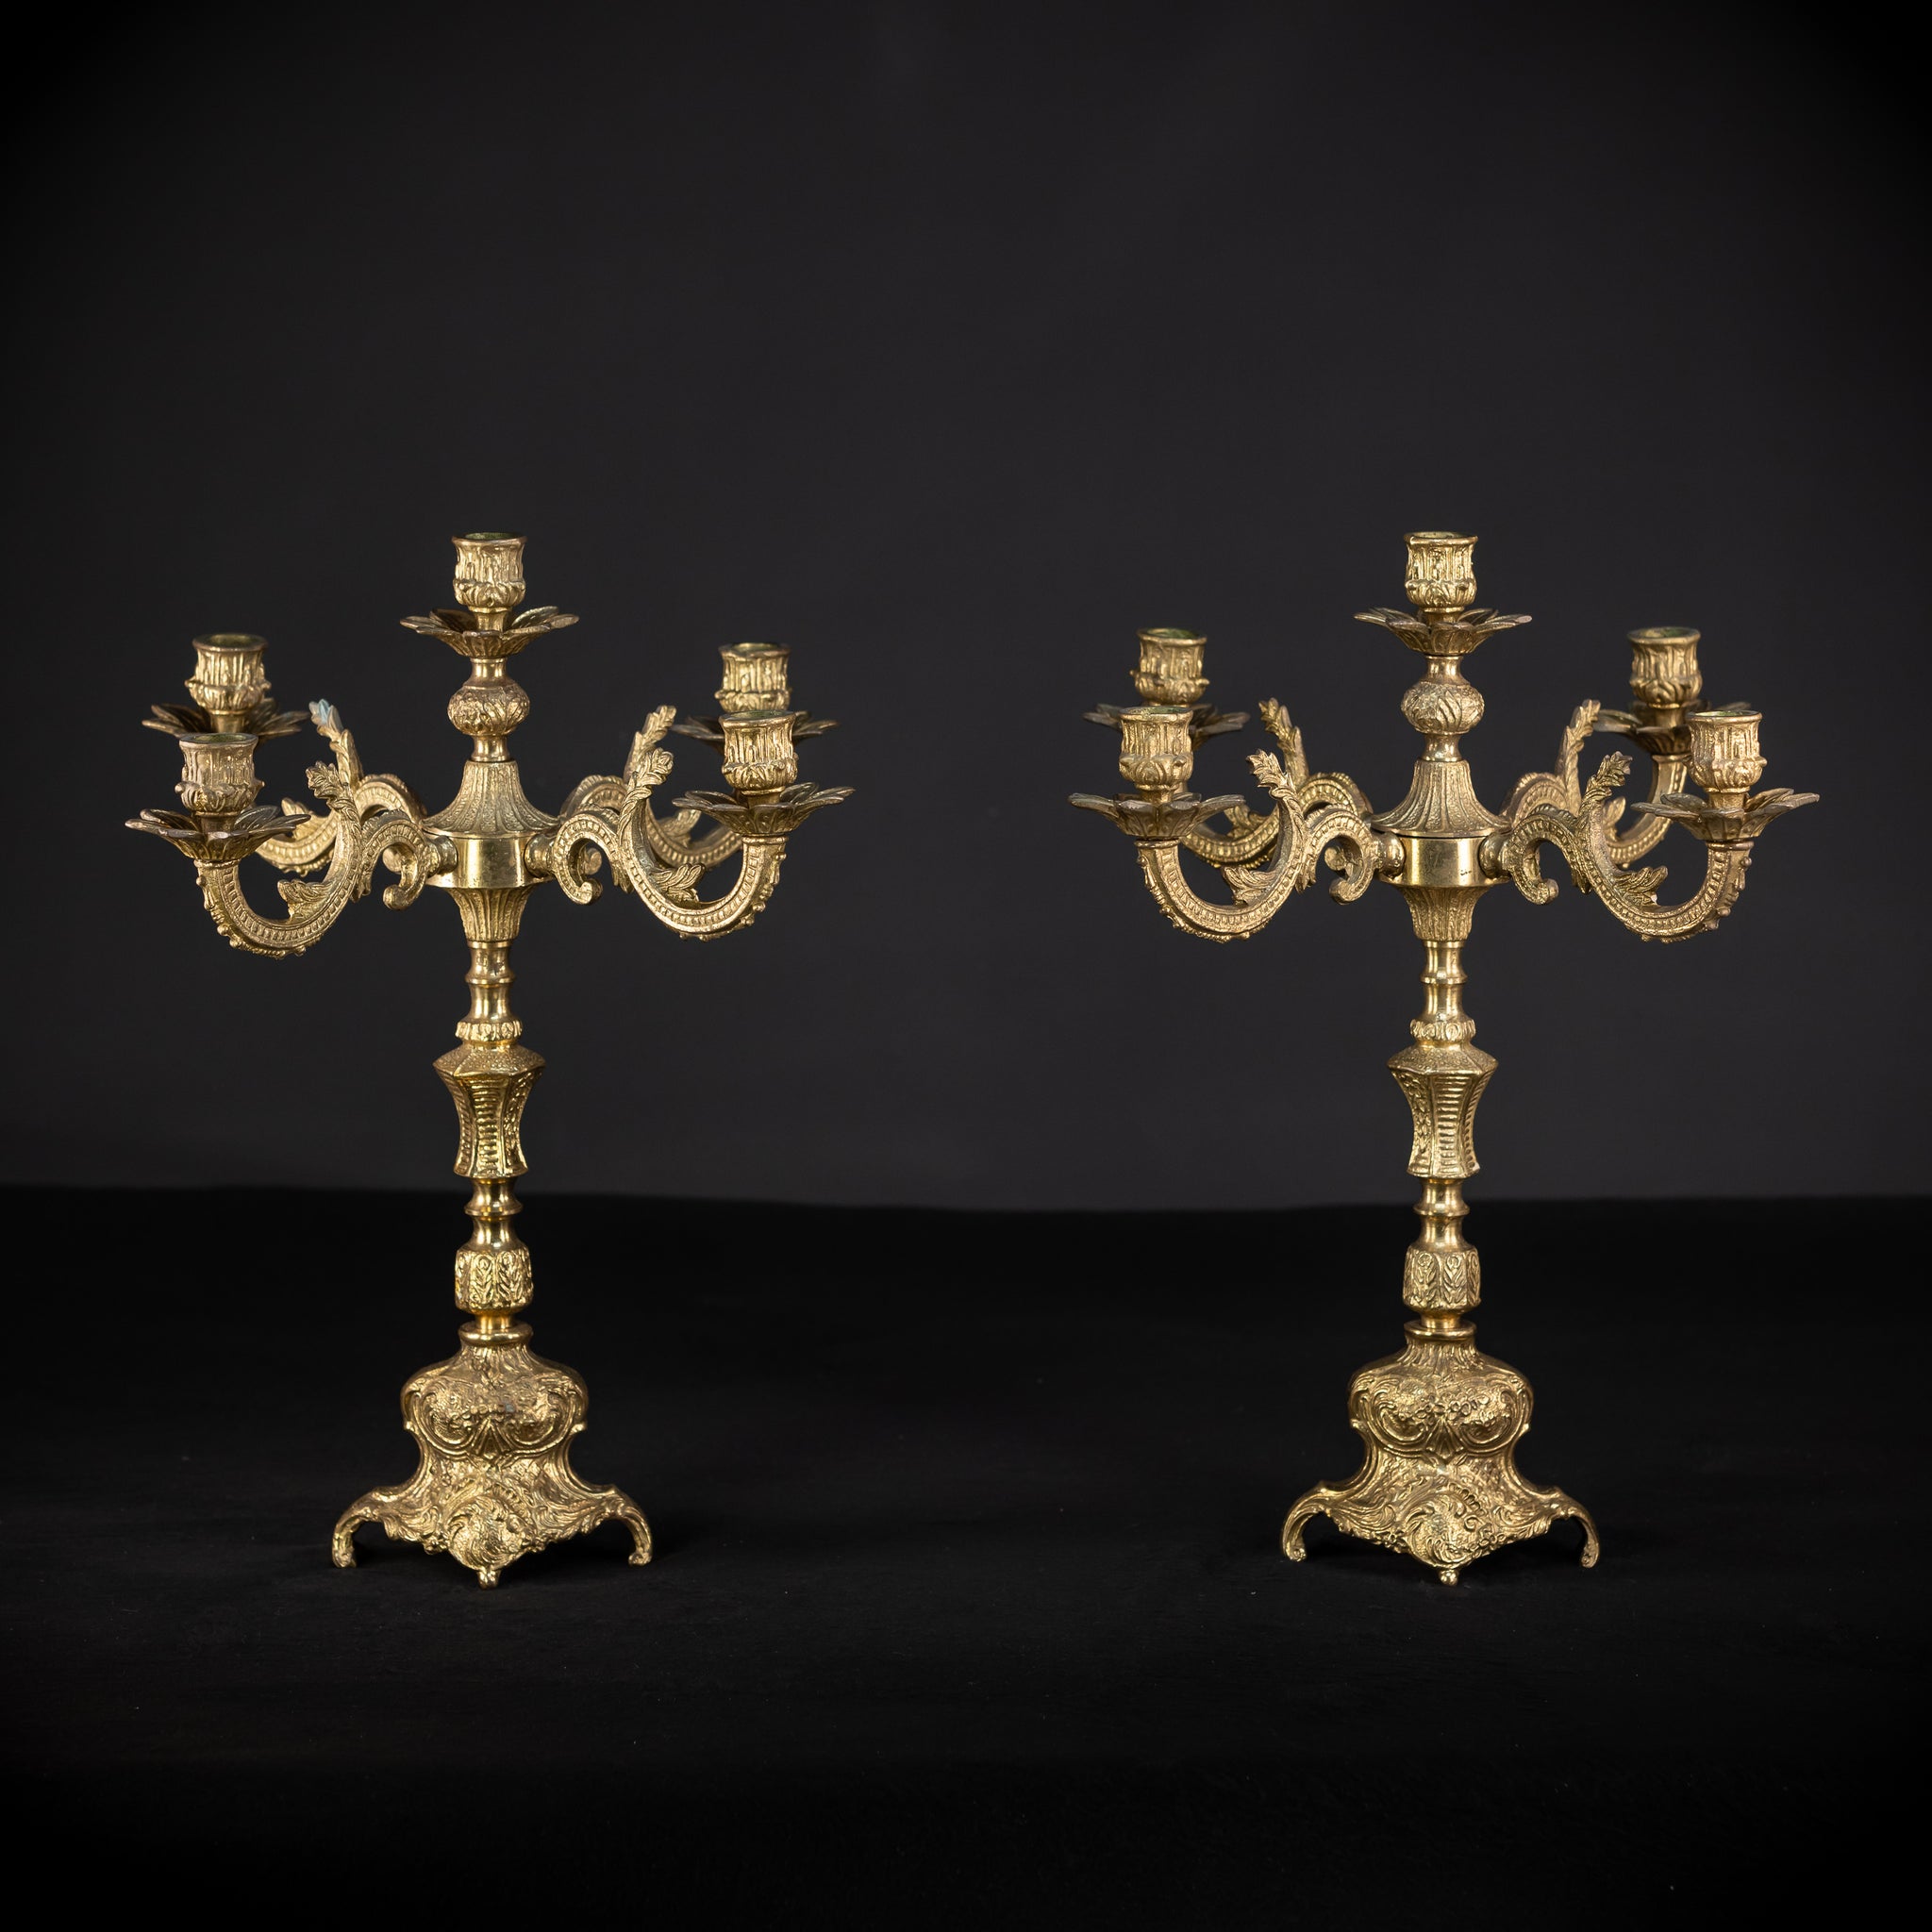 Pair of French Bronze Candelabras | Mid 1900s Vintage | 16.5"/ 42 cm